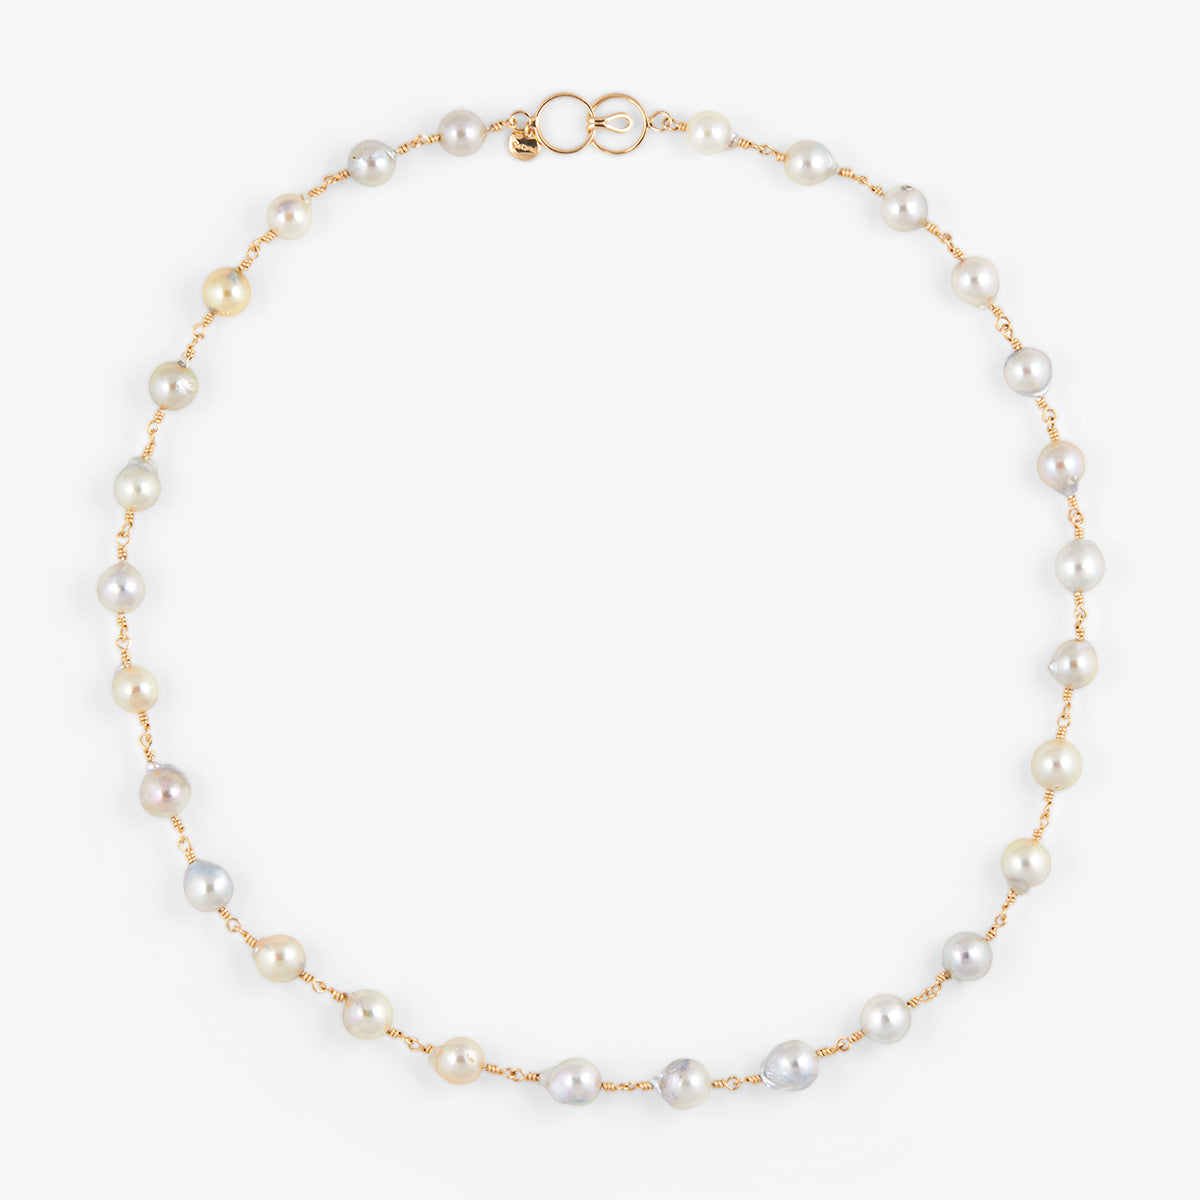 One-of-a-Kind Akoya Pearl Necklace